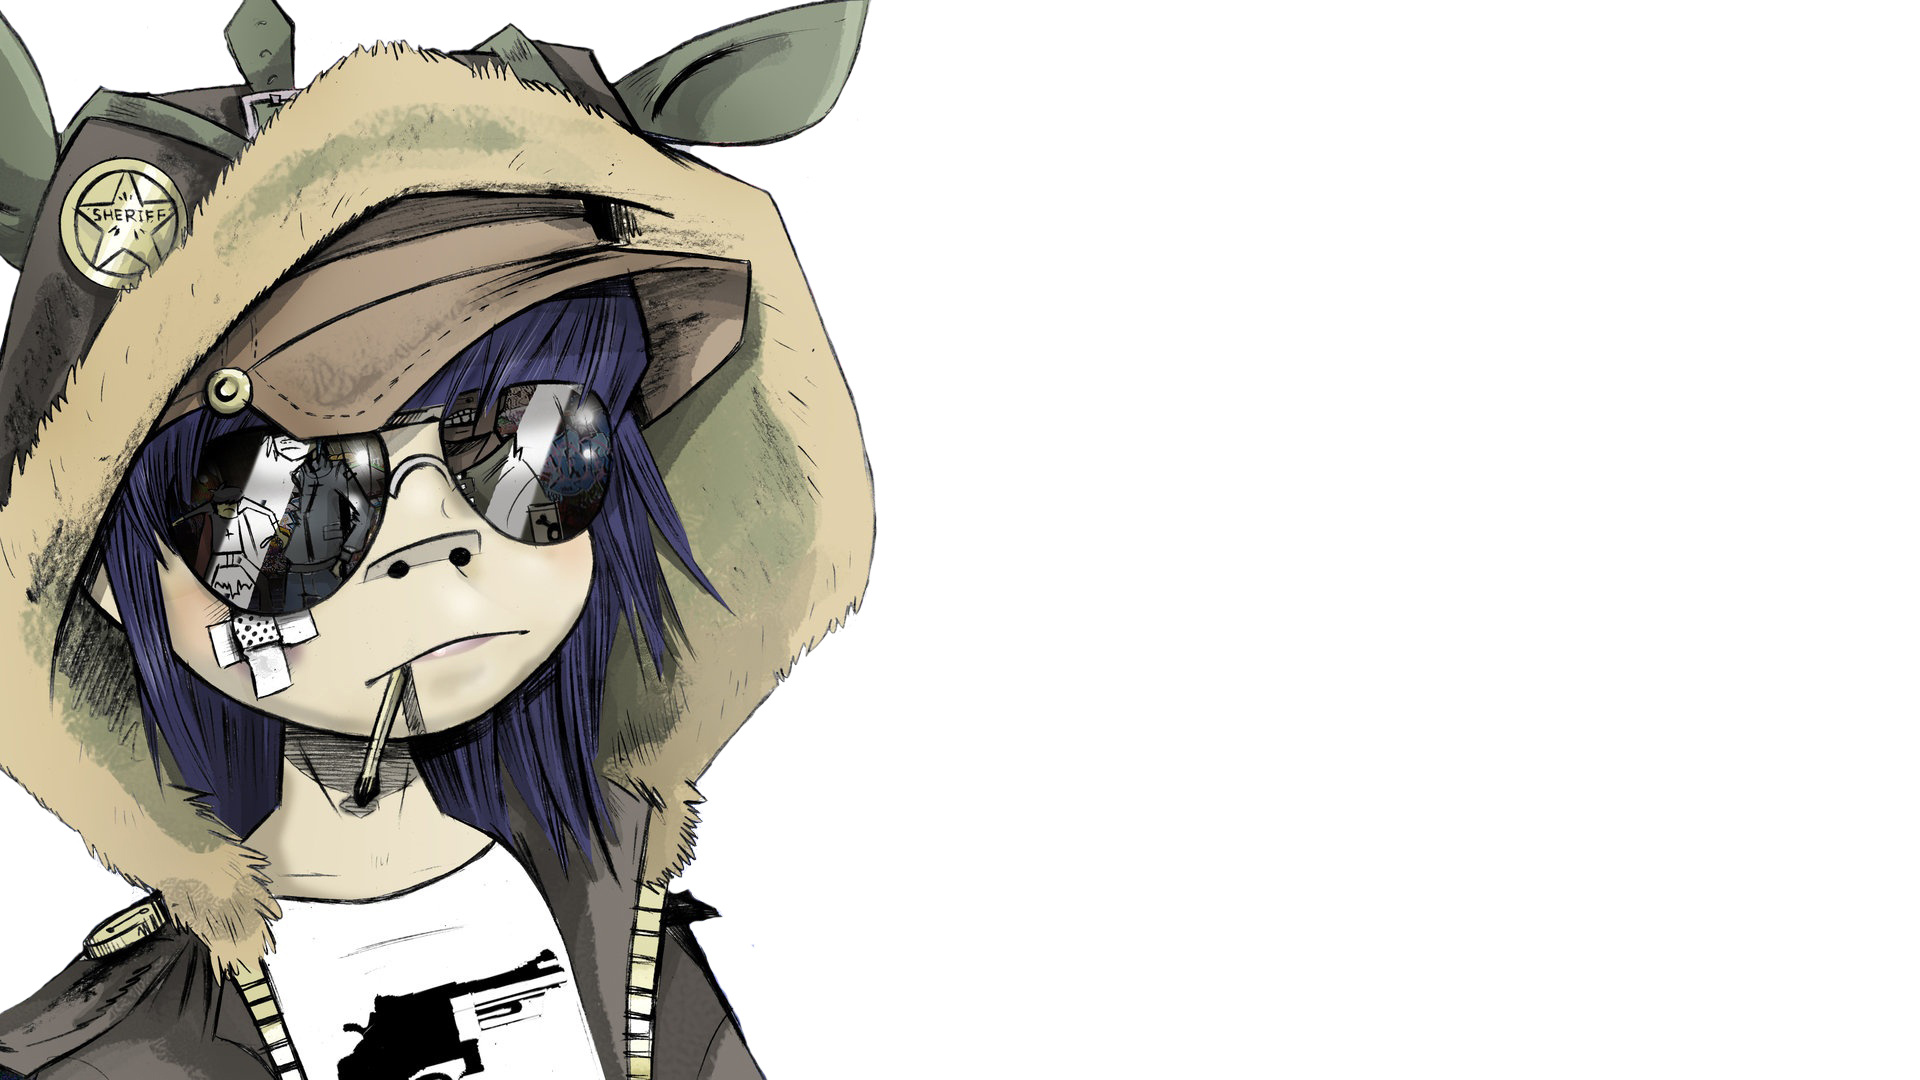 Noodle (Gorillaz): A fictional musician, Born in Osaka, Japan, Additional vocals on the single “19-2000”. 1920x1080 Full HD Wallpaper.